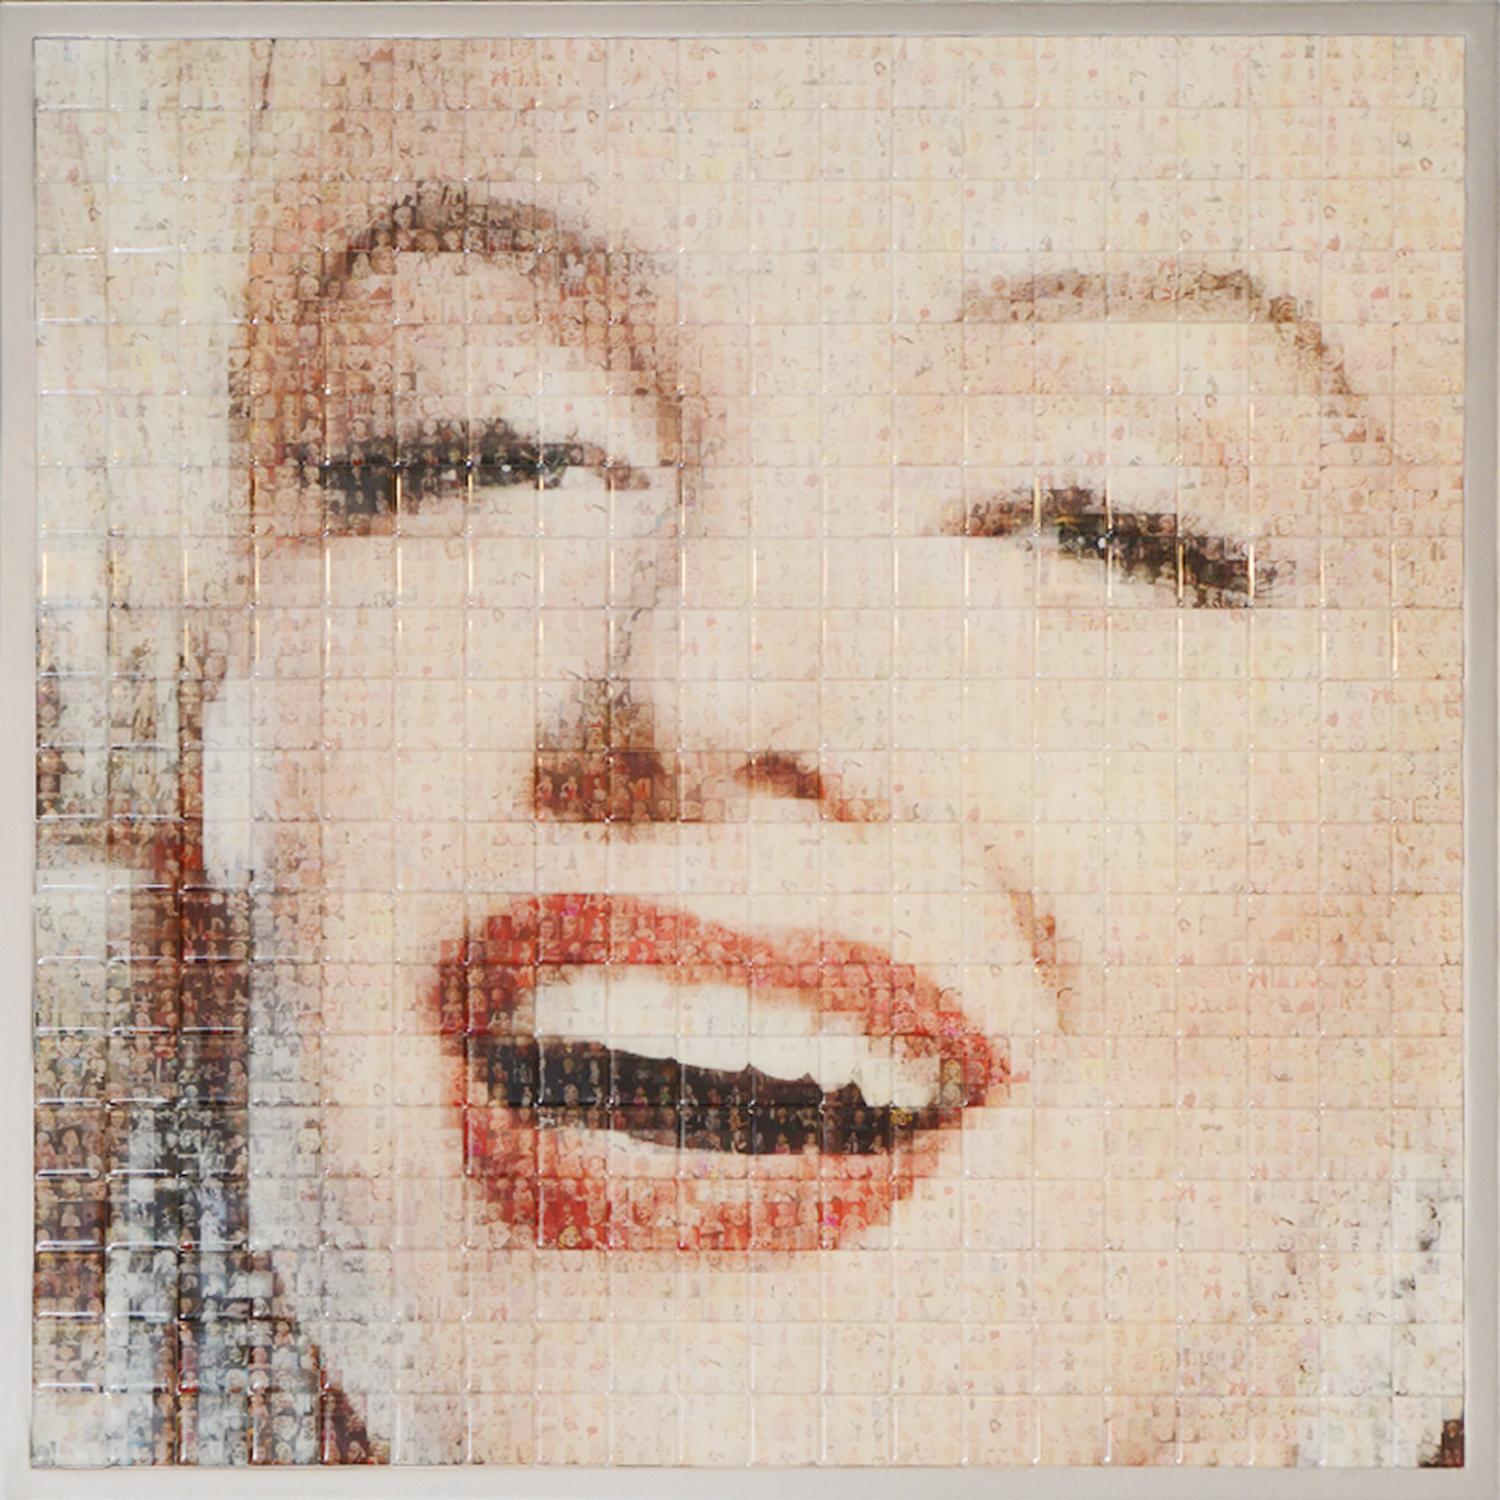 Photos Marylin Monroe Mosaic made of 400 mosaic photos
from Marylin Monroe's life, mosaic in ceramic with varnished finish.
With wooden frame in silver lacquered finish. with metal frame on 
the back to hang on the wall. Limited Edition of 8